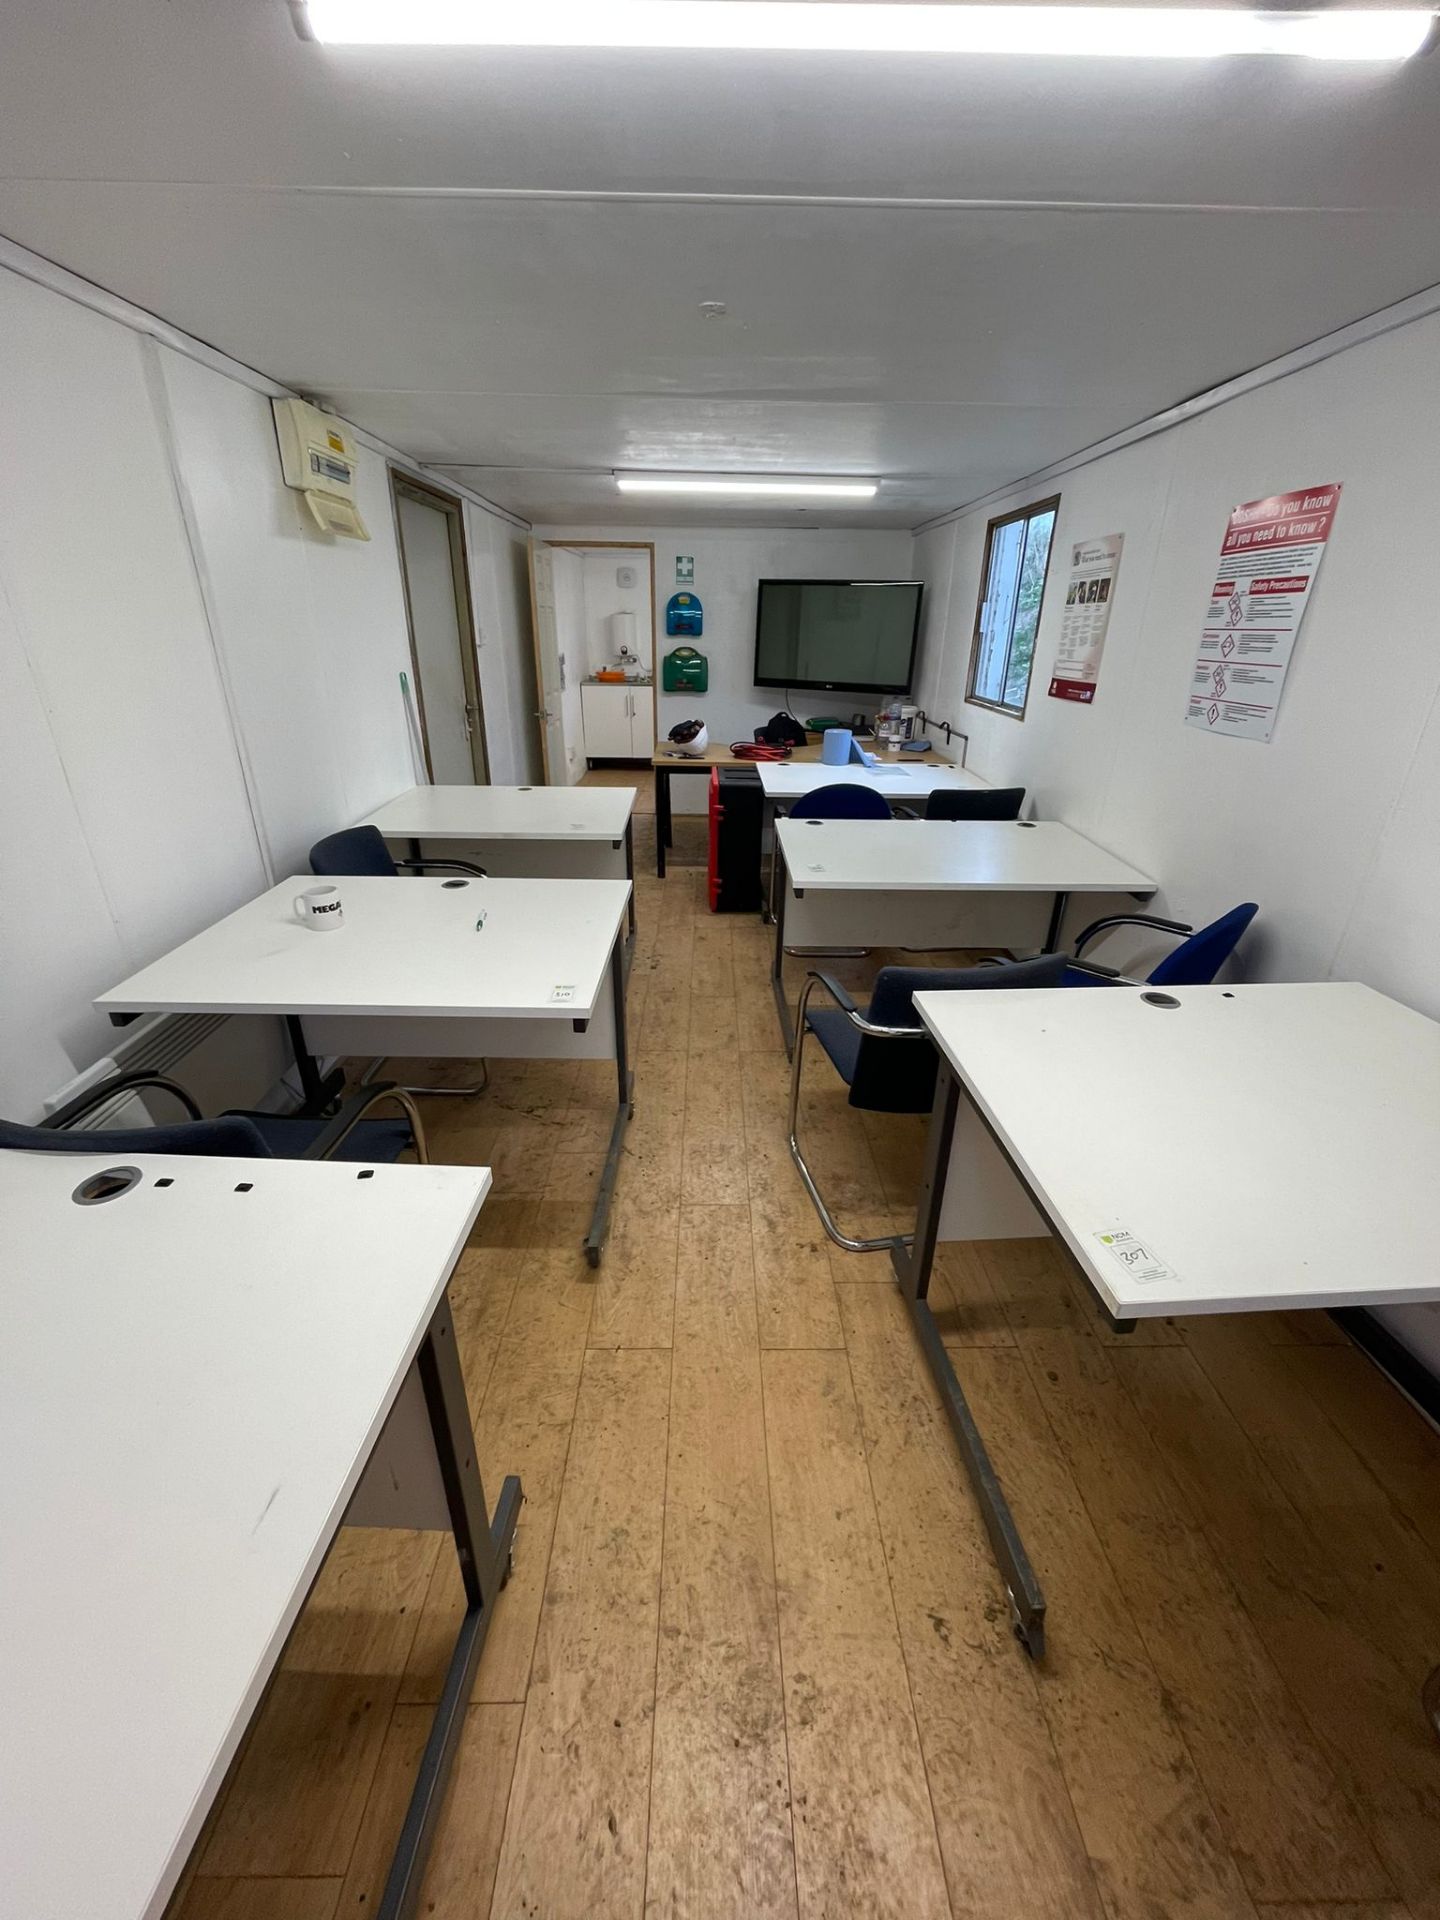 32FT X 10FT ANTI-VANDAL CABIN - OFFICE/ TRAINING ROOM AND SMALL CANTEEN AREA. - Image 7 of 8